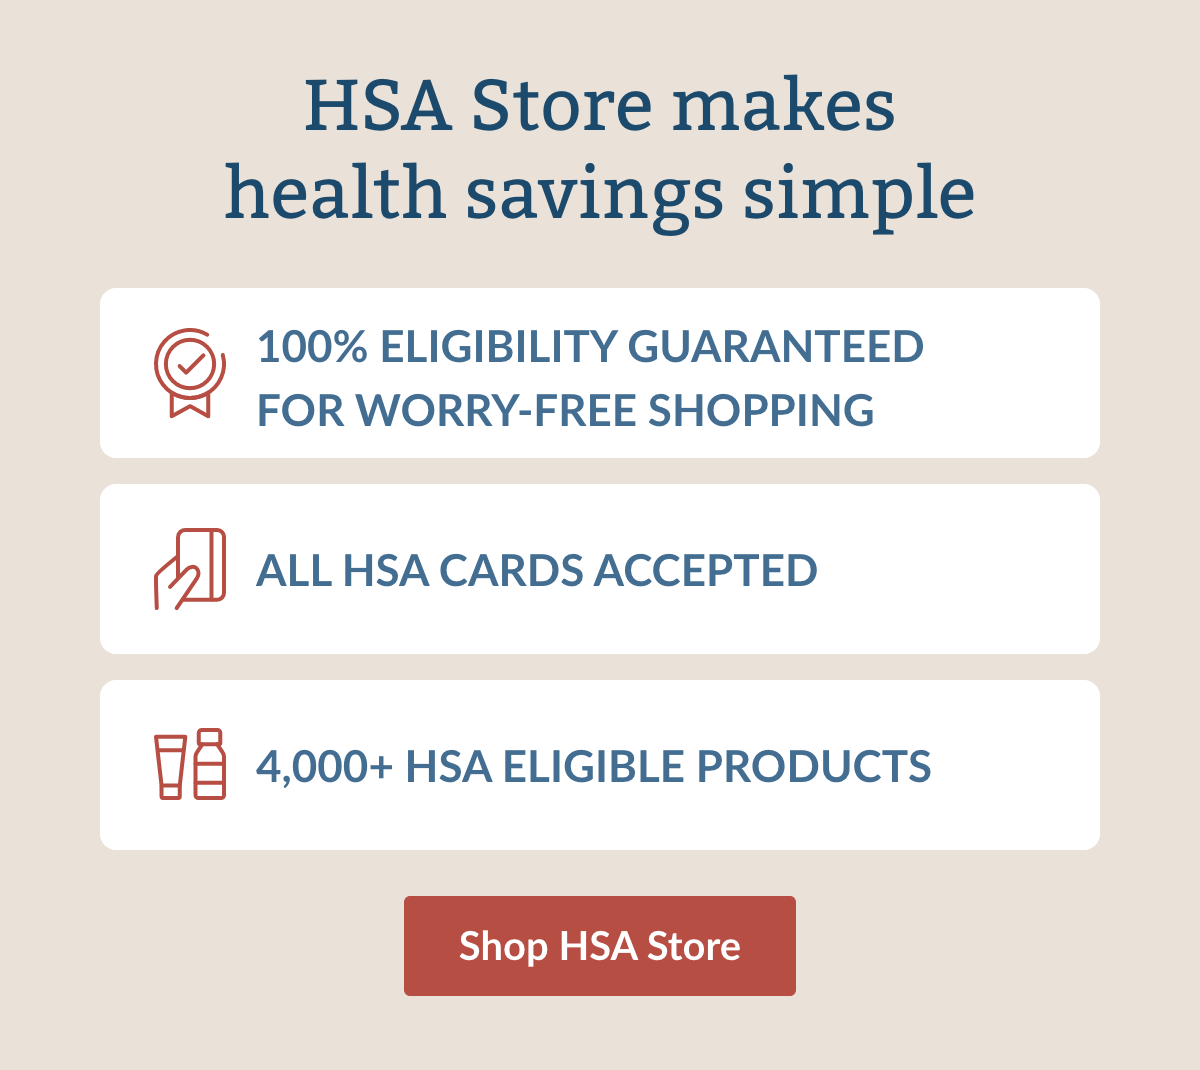 Are your favorite brands HSA eligible? 👀 - HSA Store